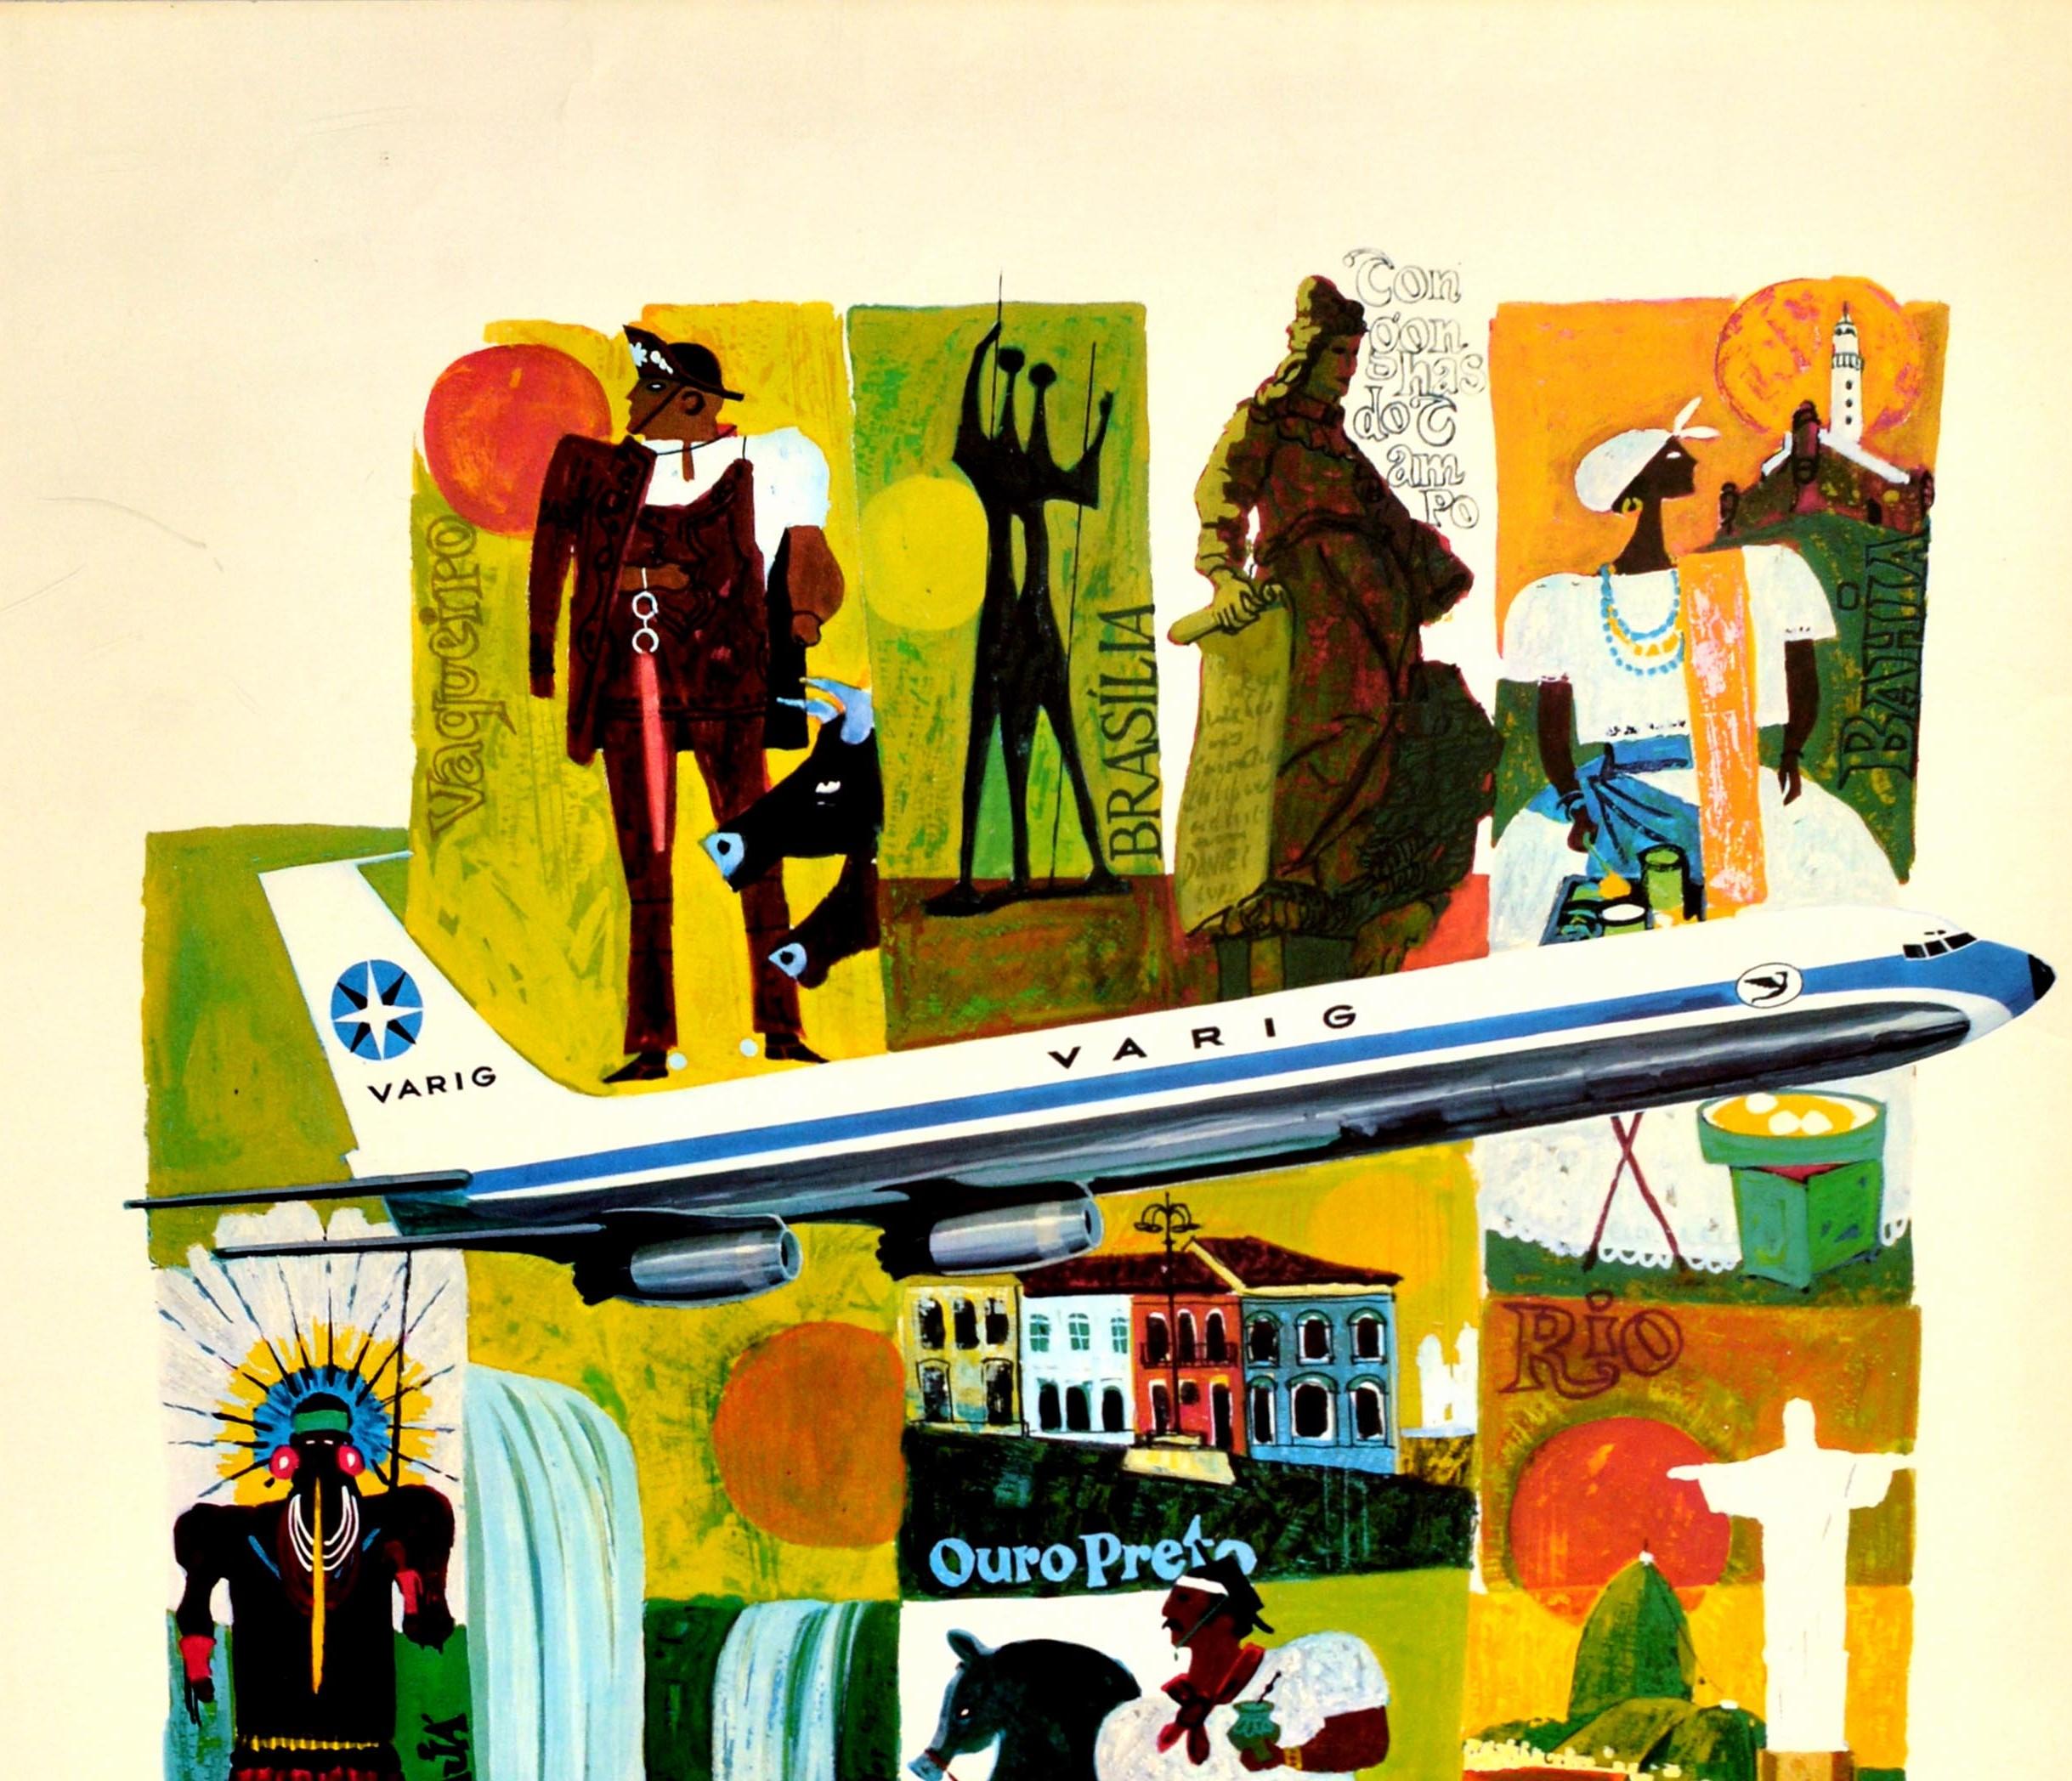 Original vintage airline travel poster for Brasil Varig featuring a colorful design with images representing different places of interest and cultures in Brazil including a vaquero / Mexican cowboy and a bull in front of a red sun, the historical